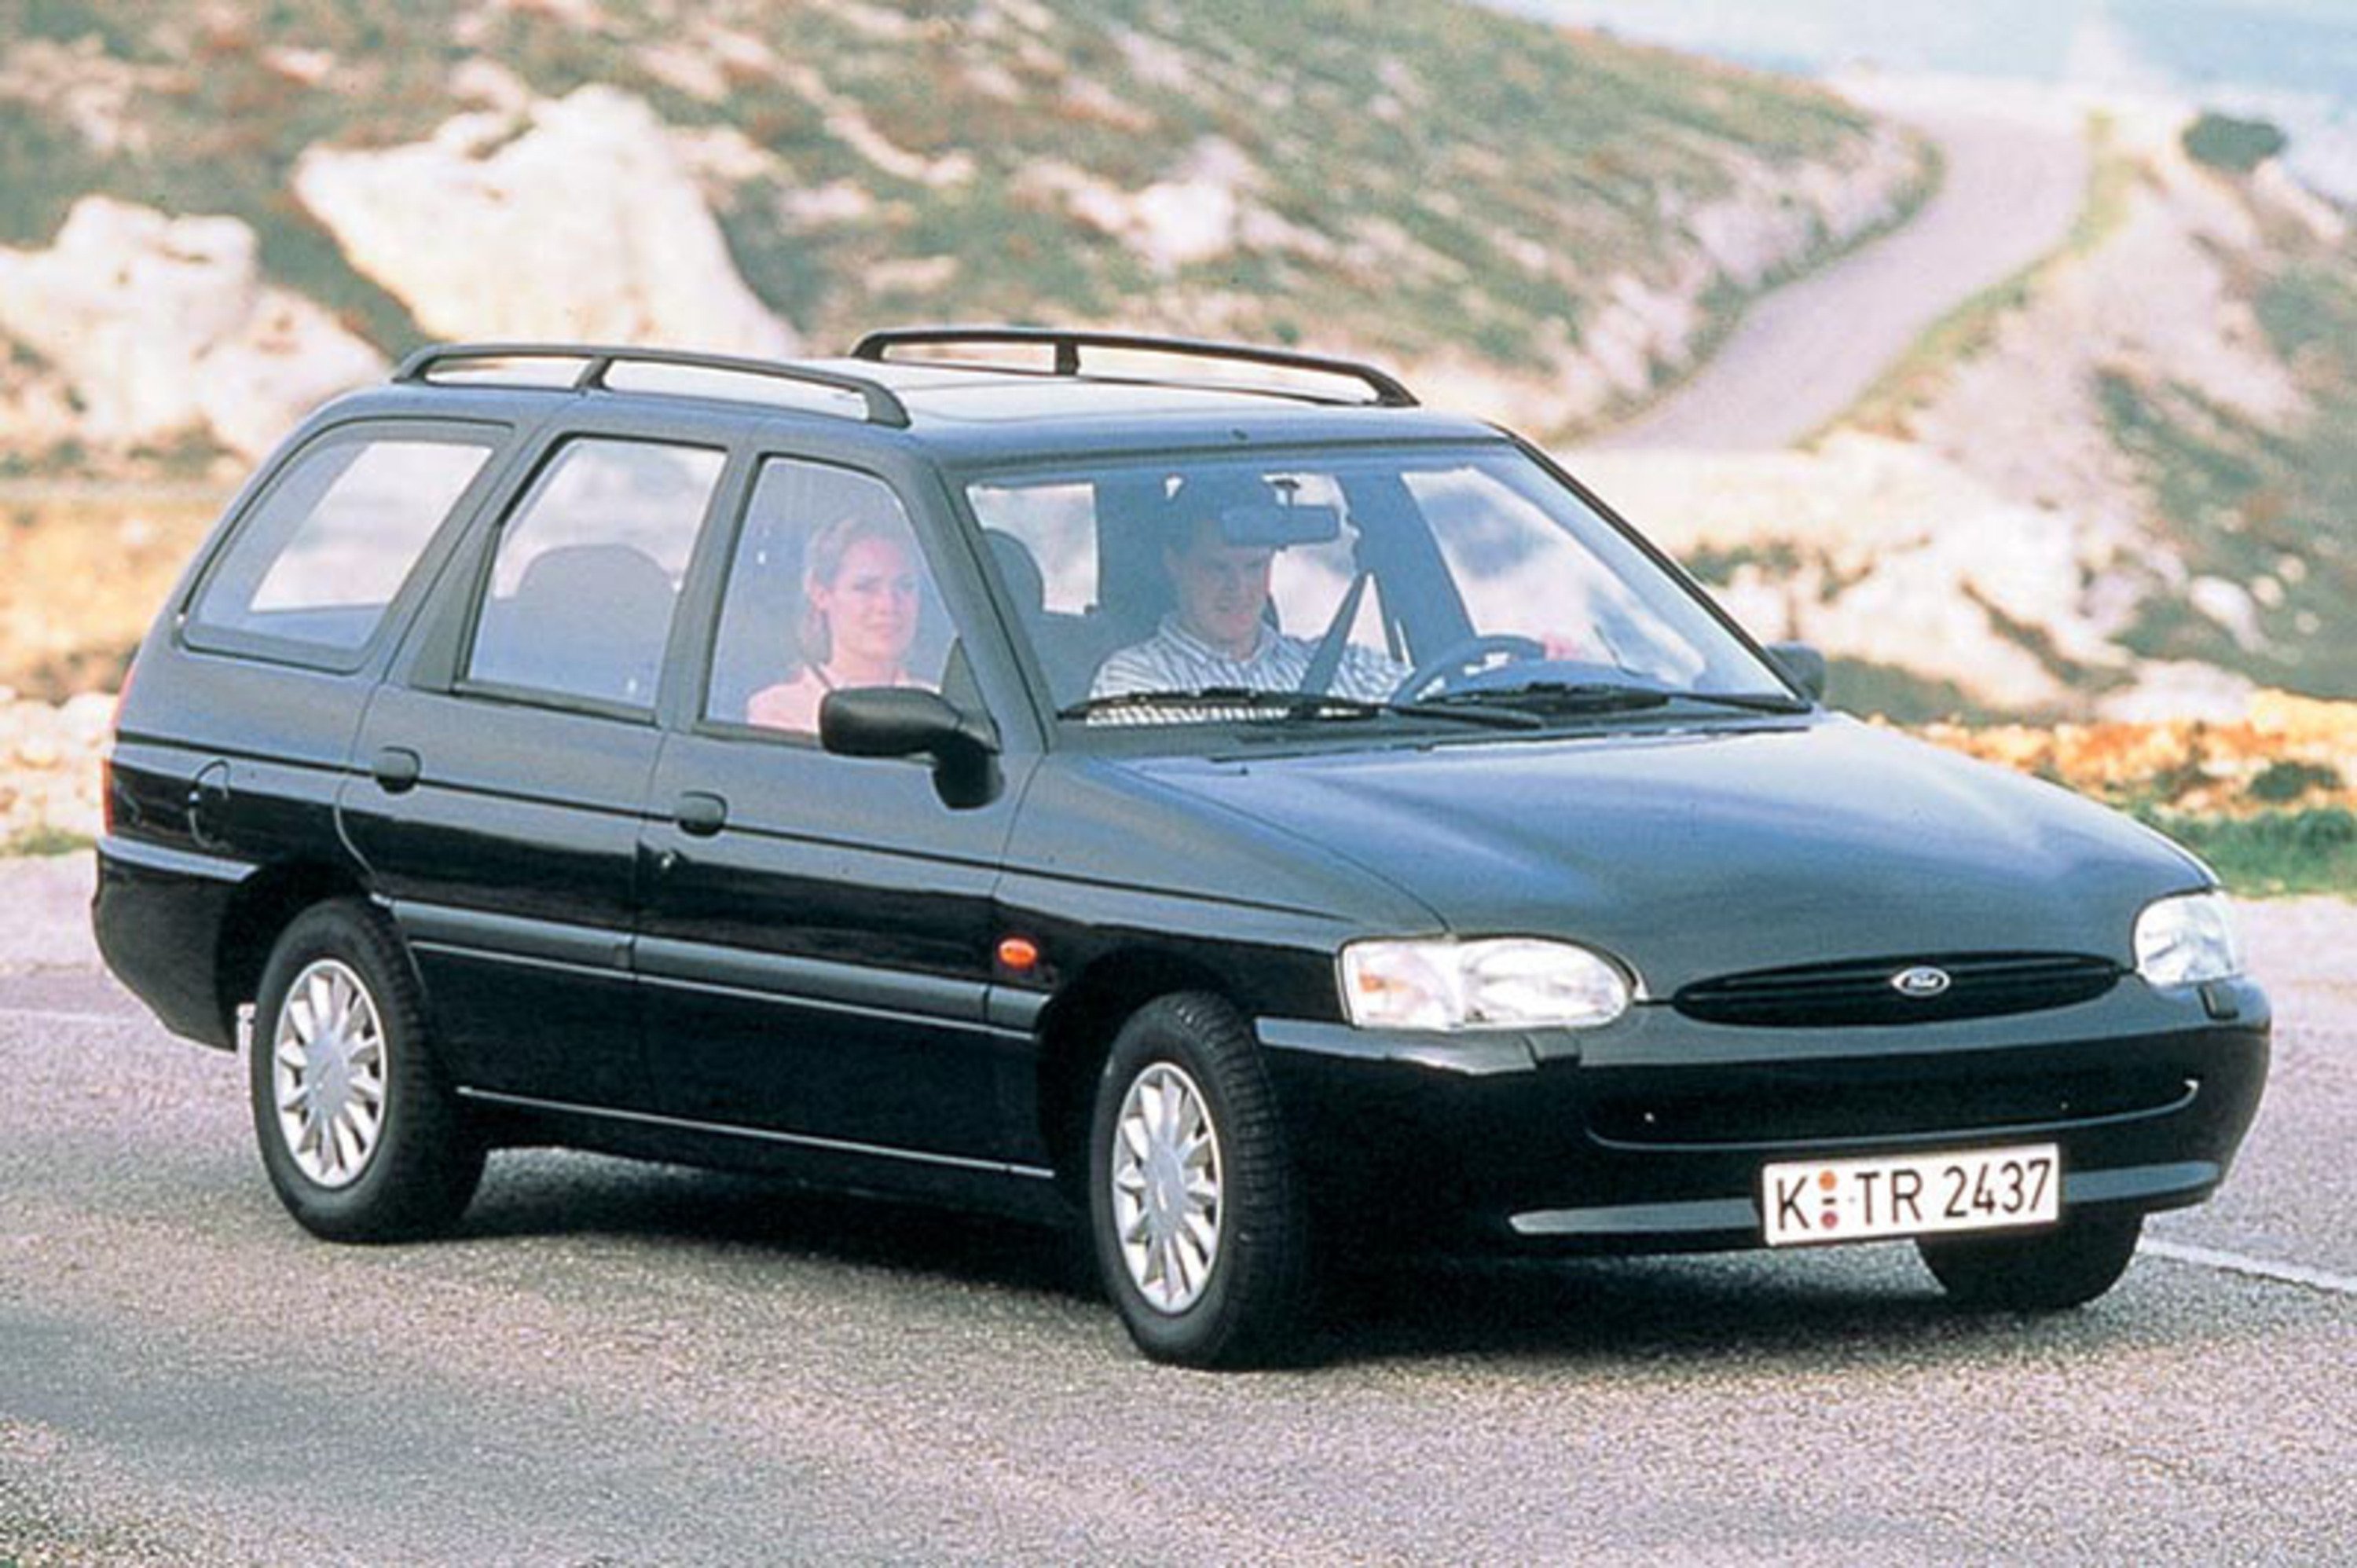 Ford Escort/Orion Station Wagon 1.8 diesel cat S.W. 3p.